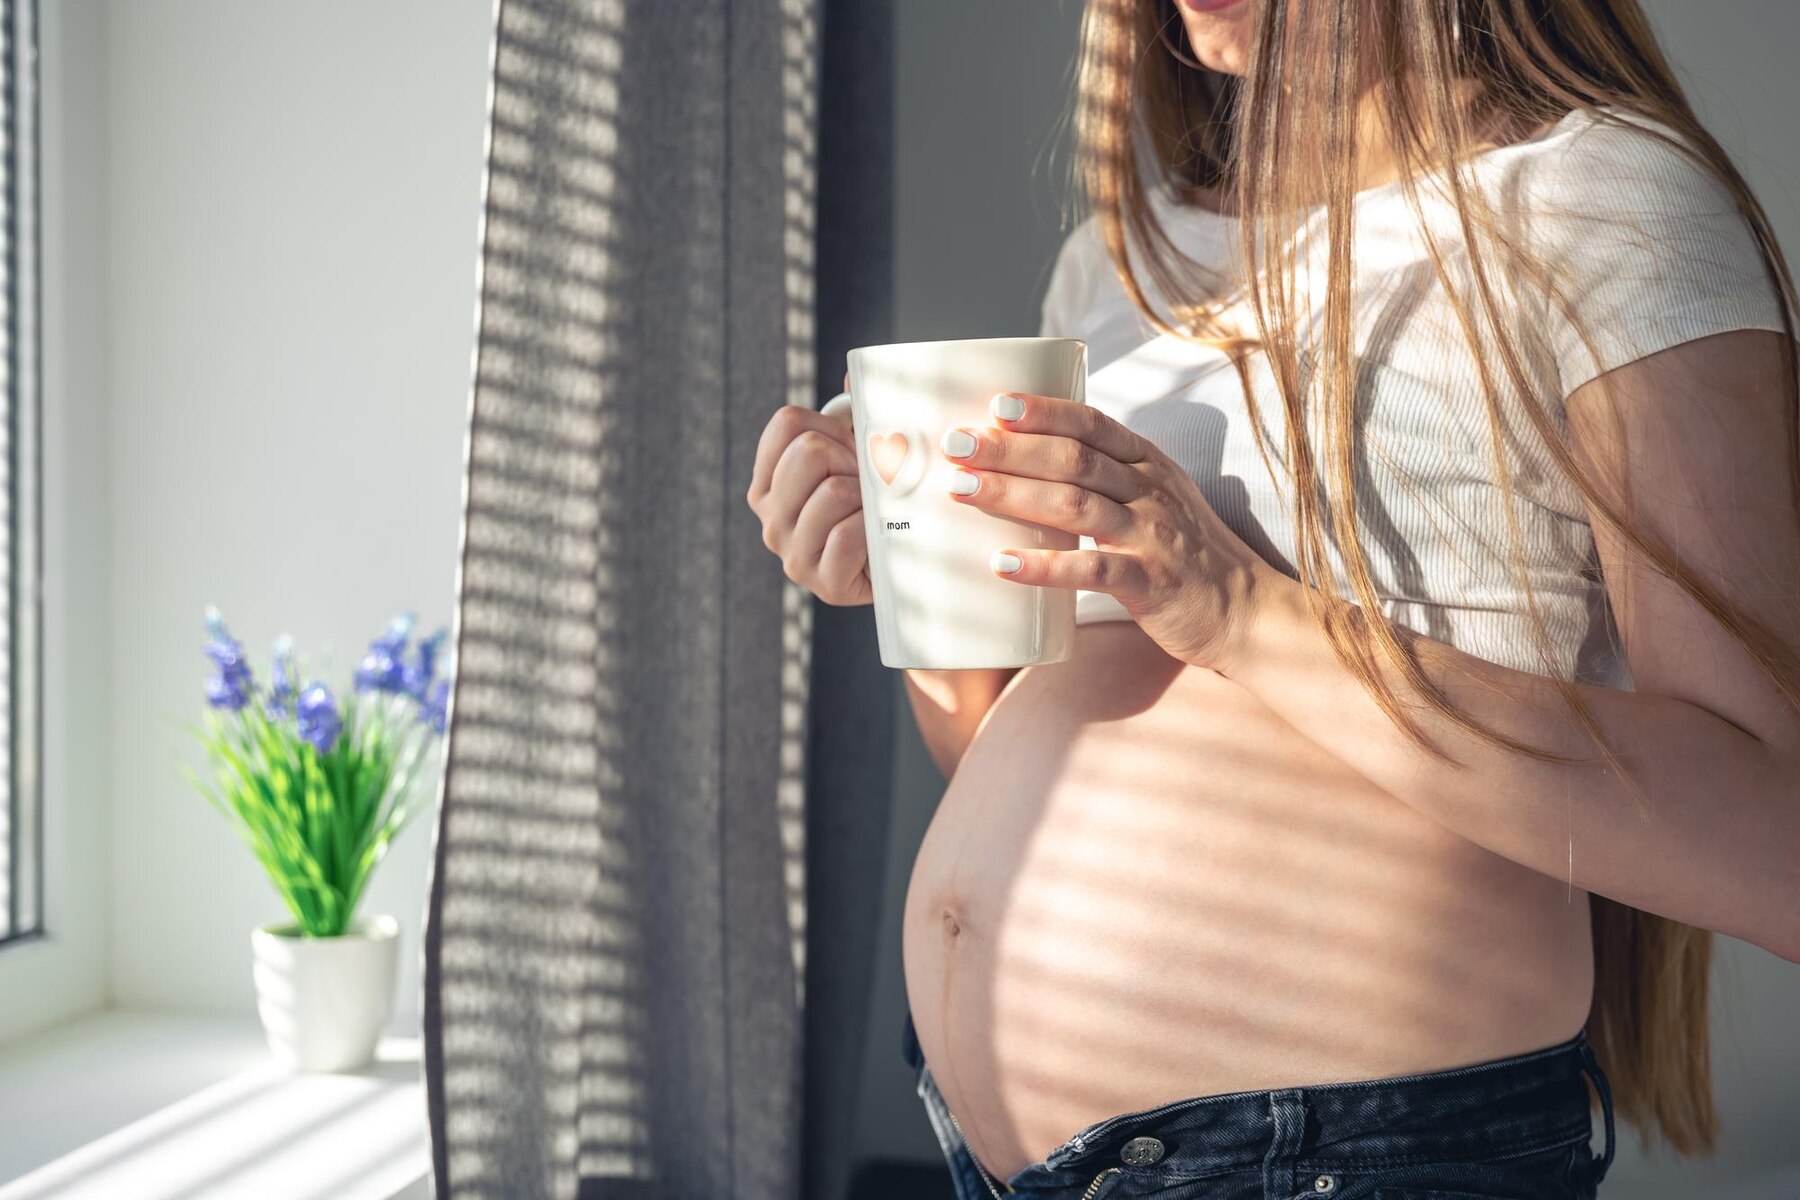 a-pregnant-woman-with-a-cup-of-tea-at-the-window-in-the-morning_169016-27469.jpg